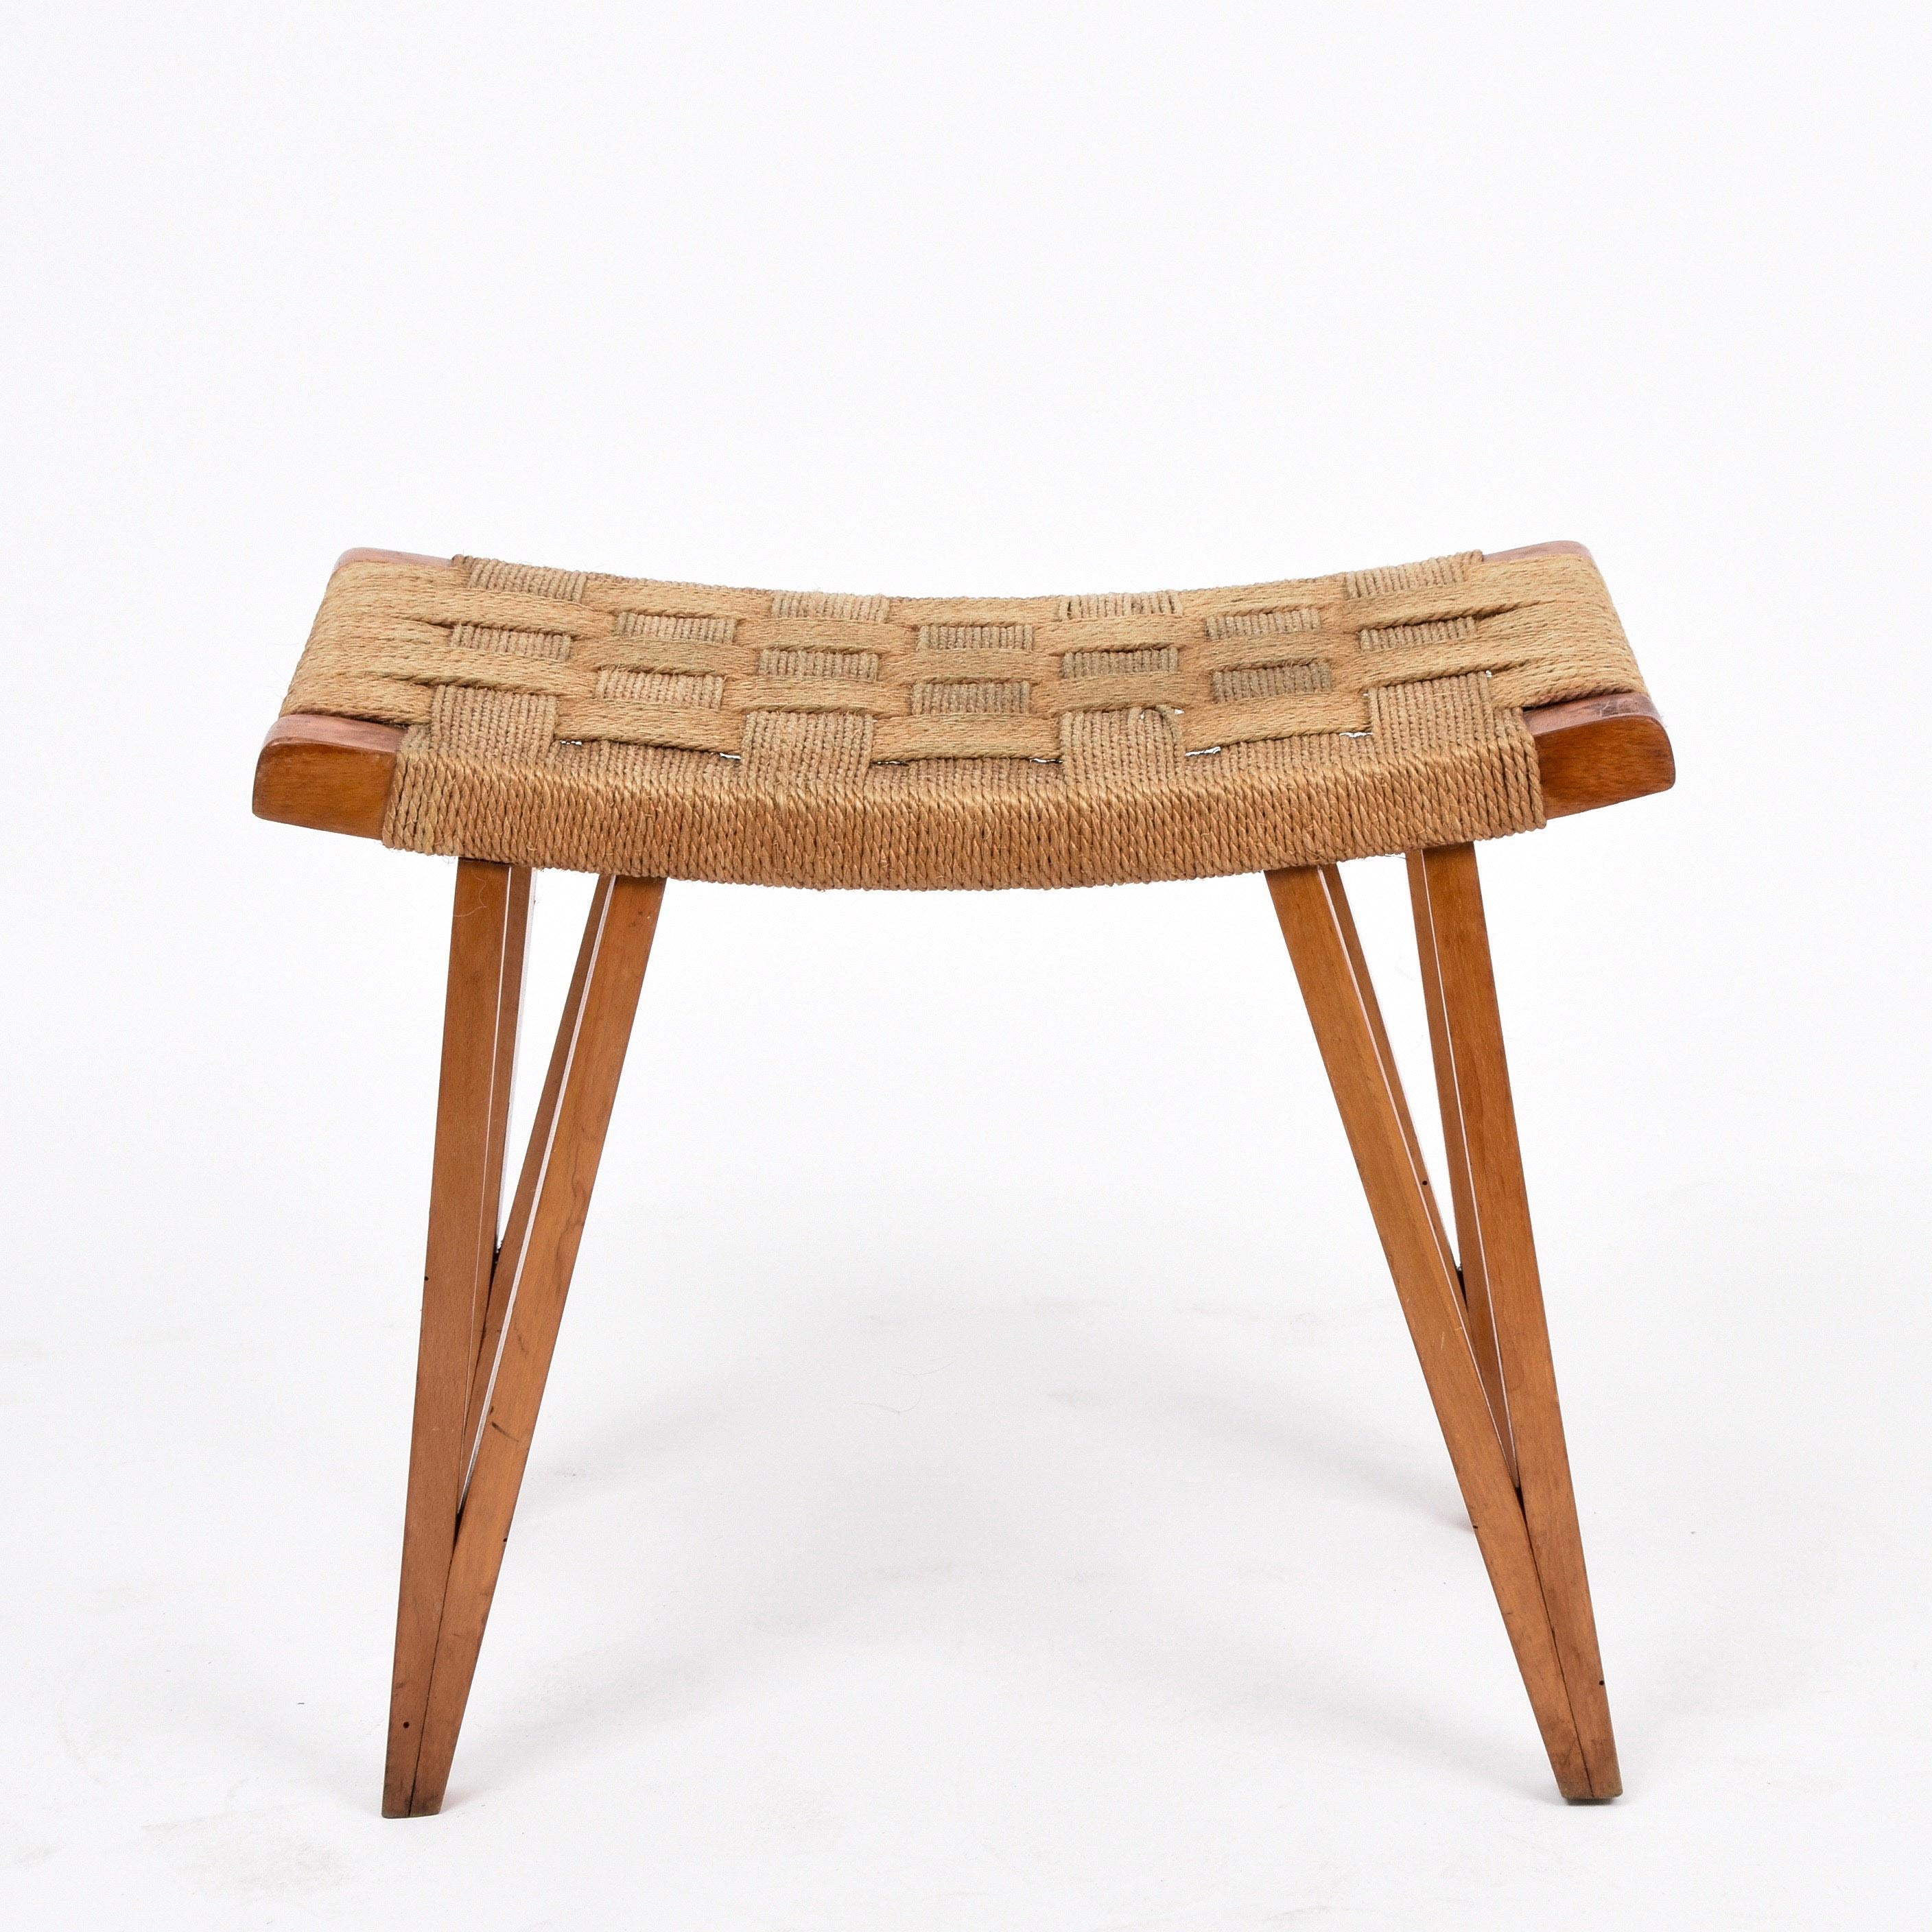 Giuseppe Pagano Pogatschnig Midcentury Wood and Rope Italian Stool, 1940s In Good Condition In Roma, IT